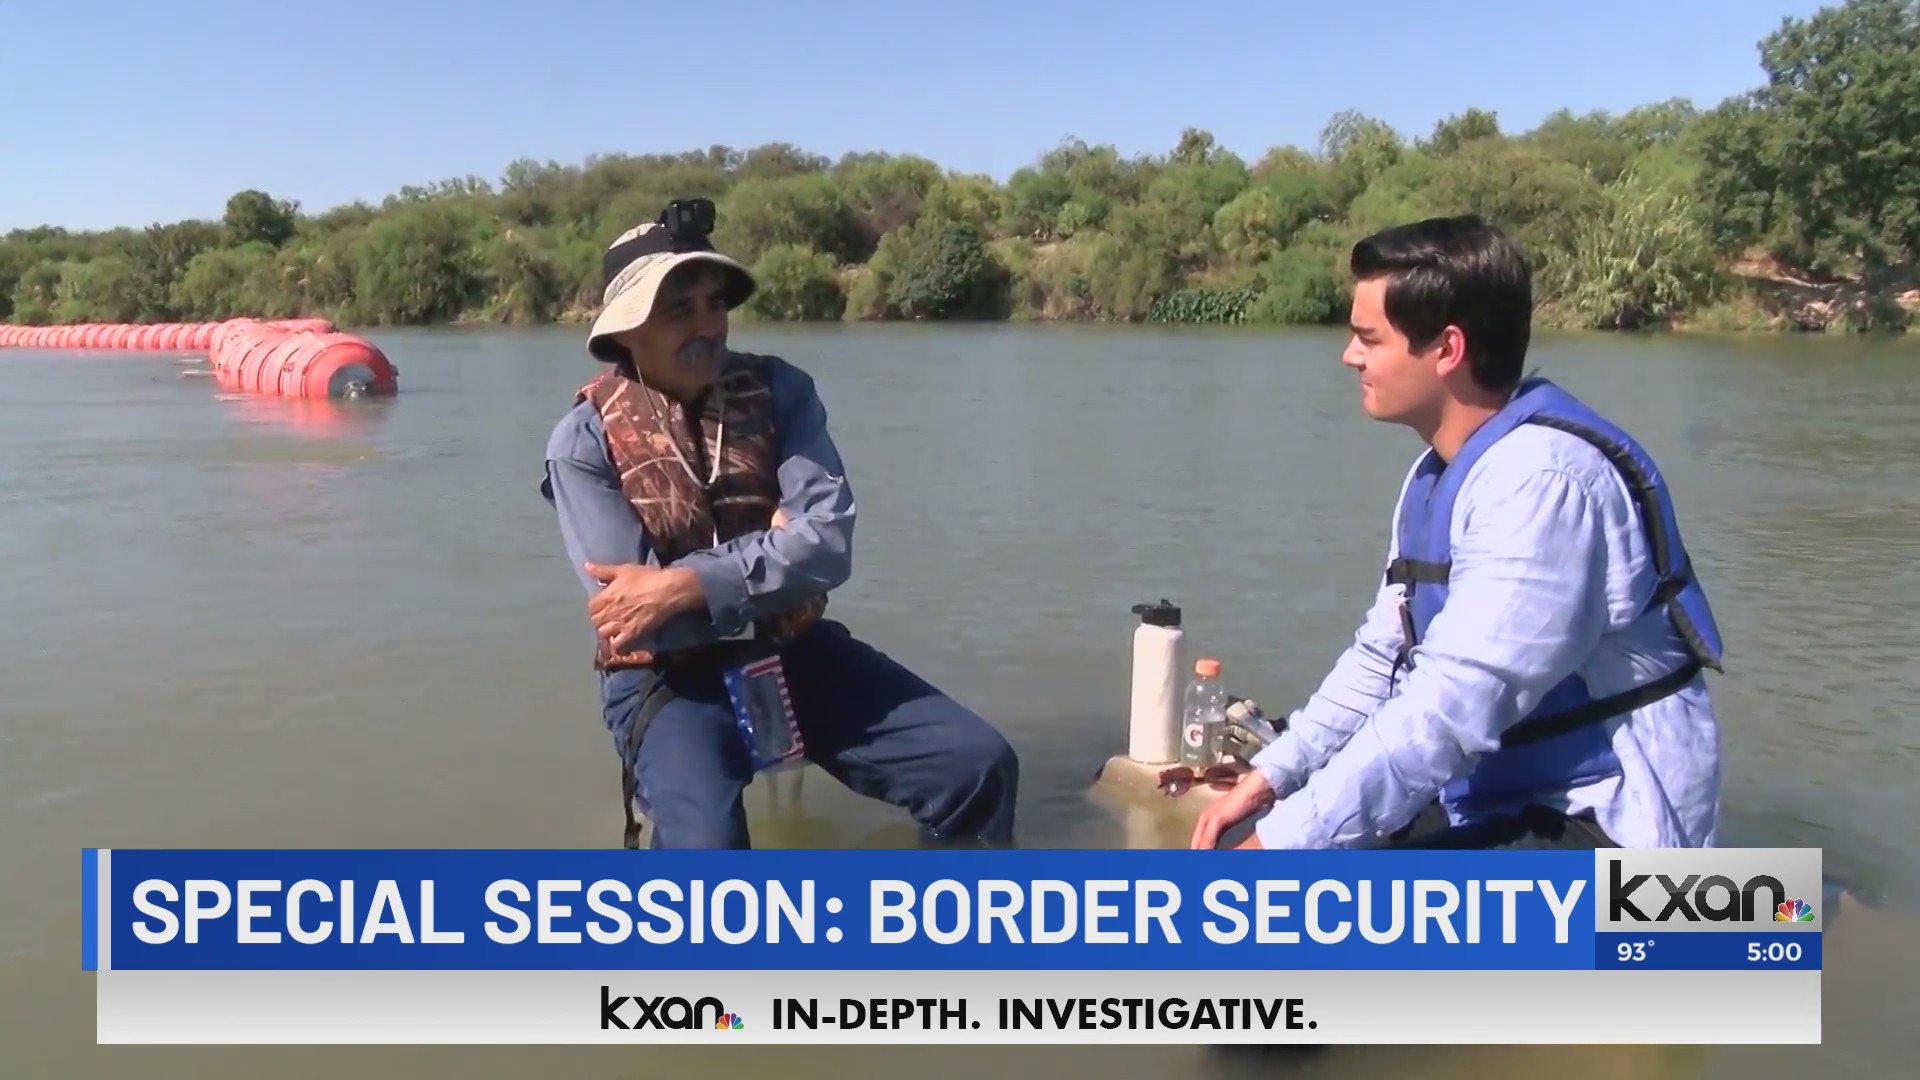 Border security debate looming in Texas' third special session